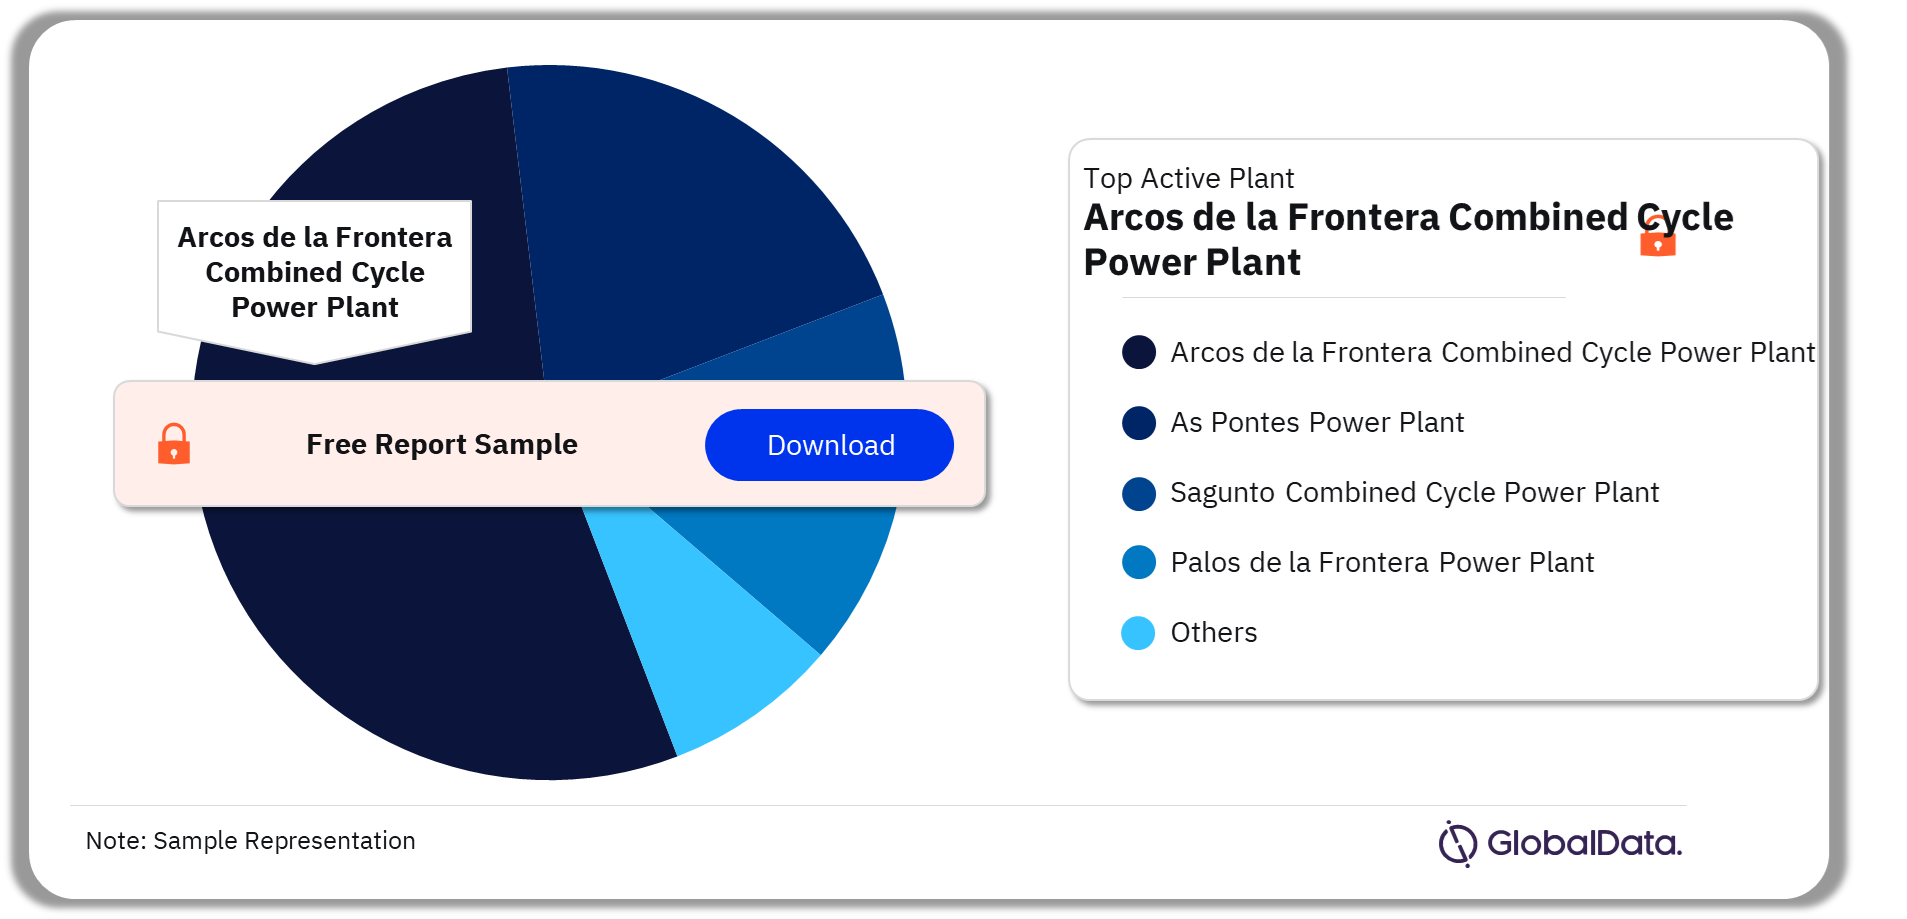 Spain Thermal Power Market Analysis by Active Plants, 2023 (%)